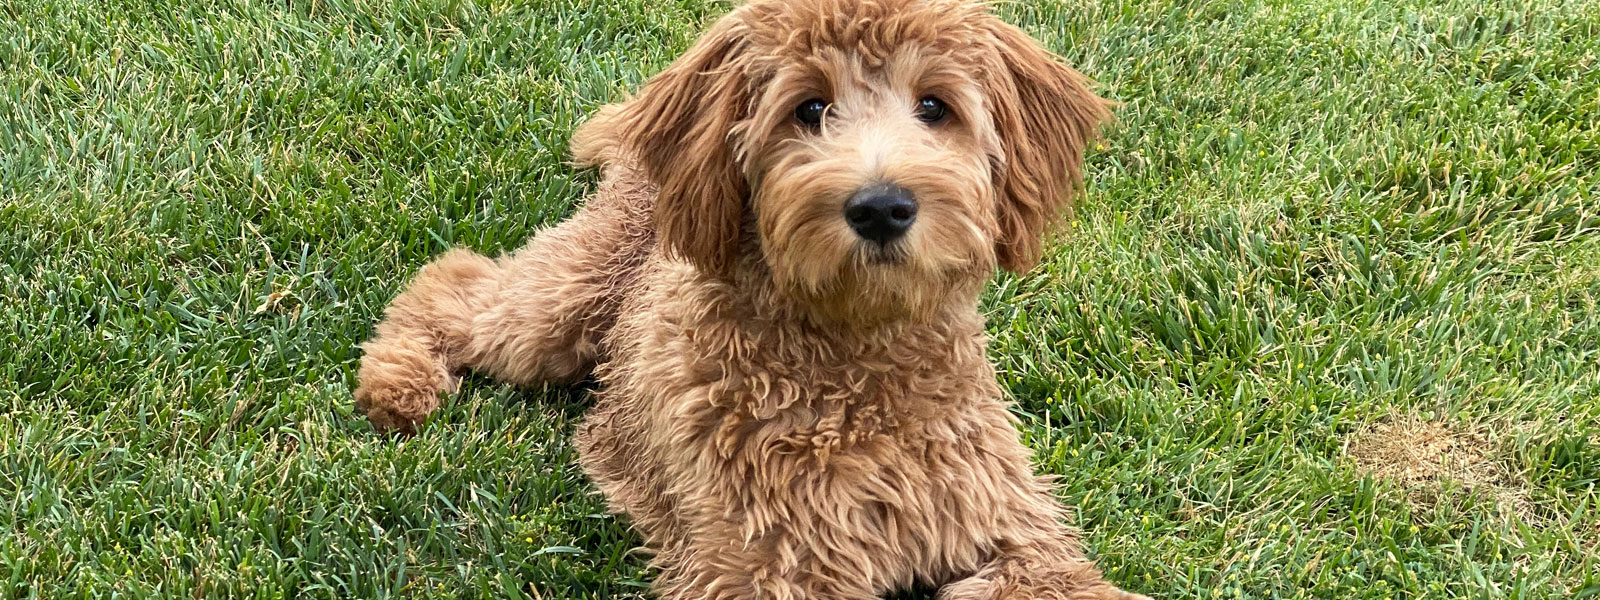 21 How To Clean Goldendoodle Ears
 10/2022